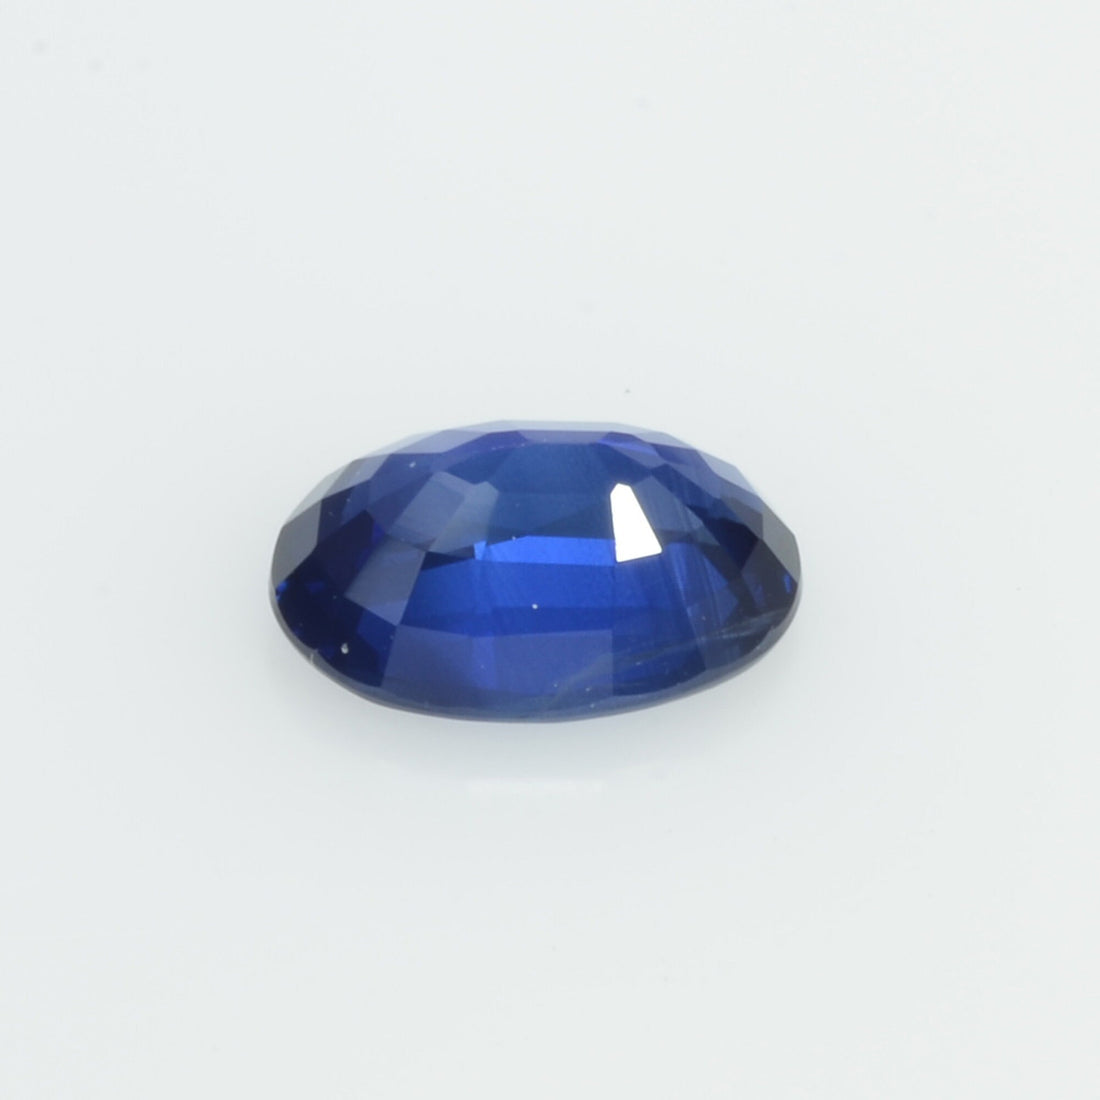 0.89 cts Natural Blue Sapphire Loose Gemstone Oval Cut